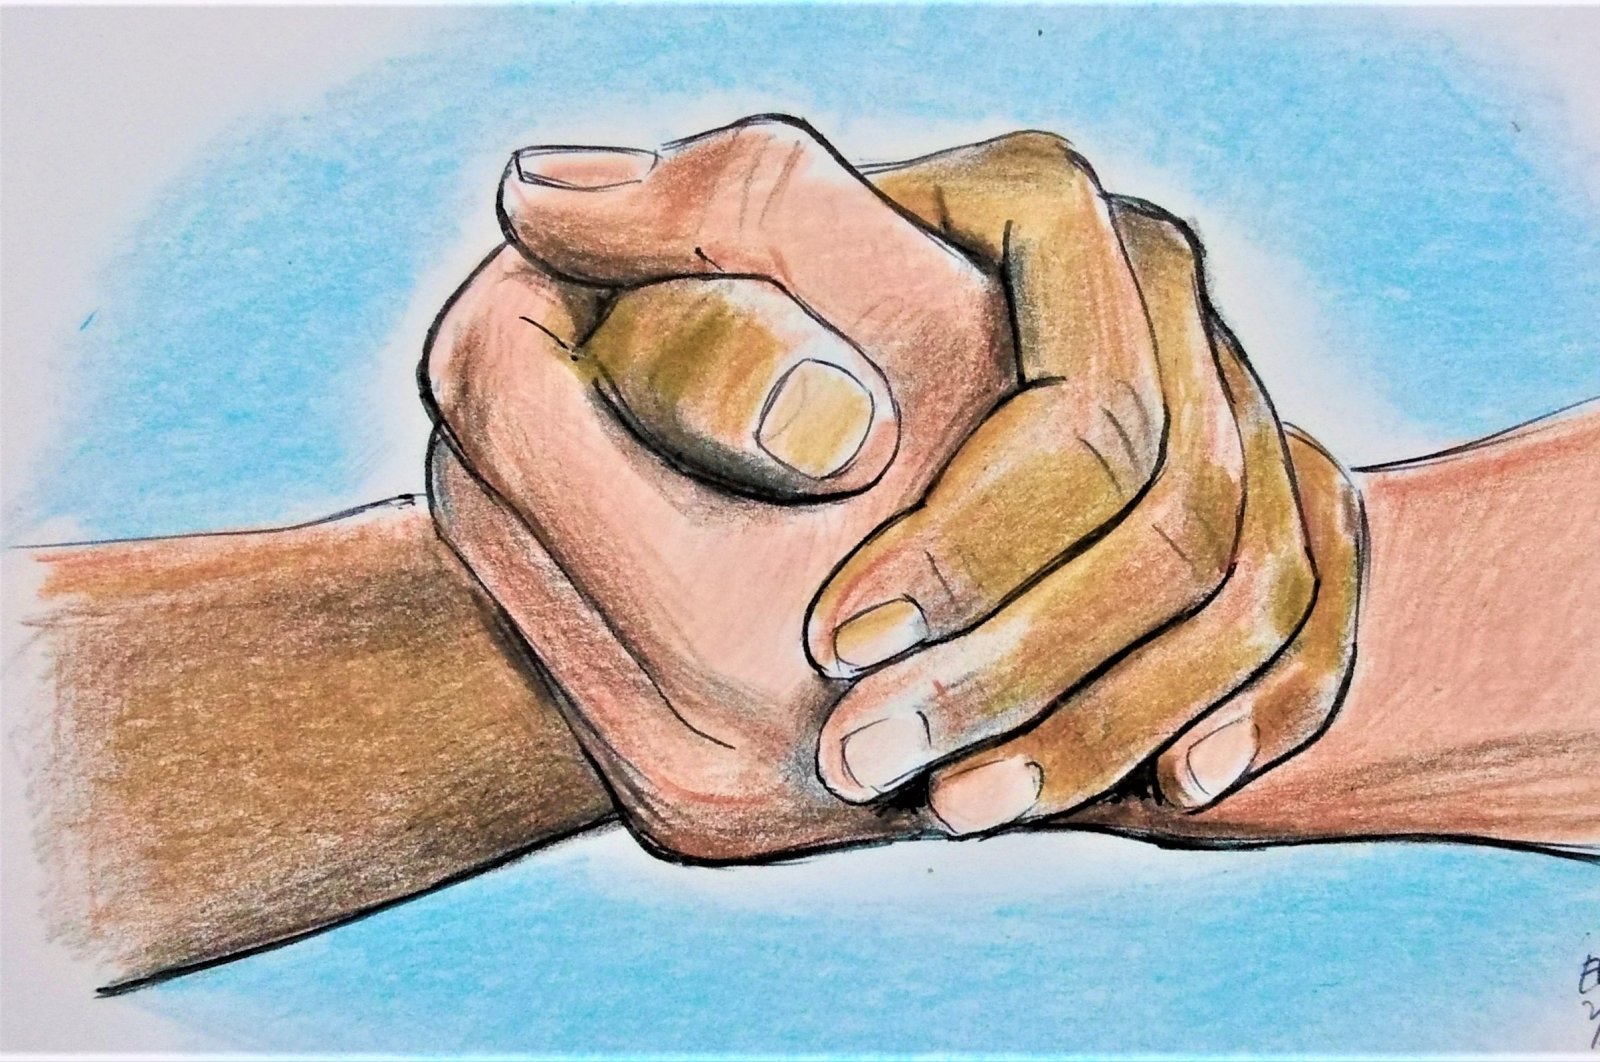 An illustration by Daily Sabah's Erhan Yalvaç shows two hands shaking as a symbol for the brotherhood and friendship of Turkey and African nations.